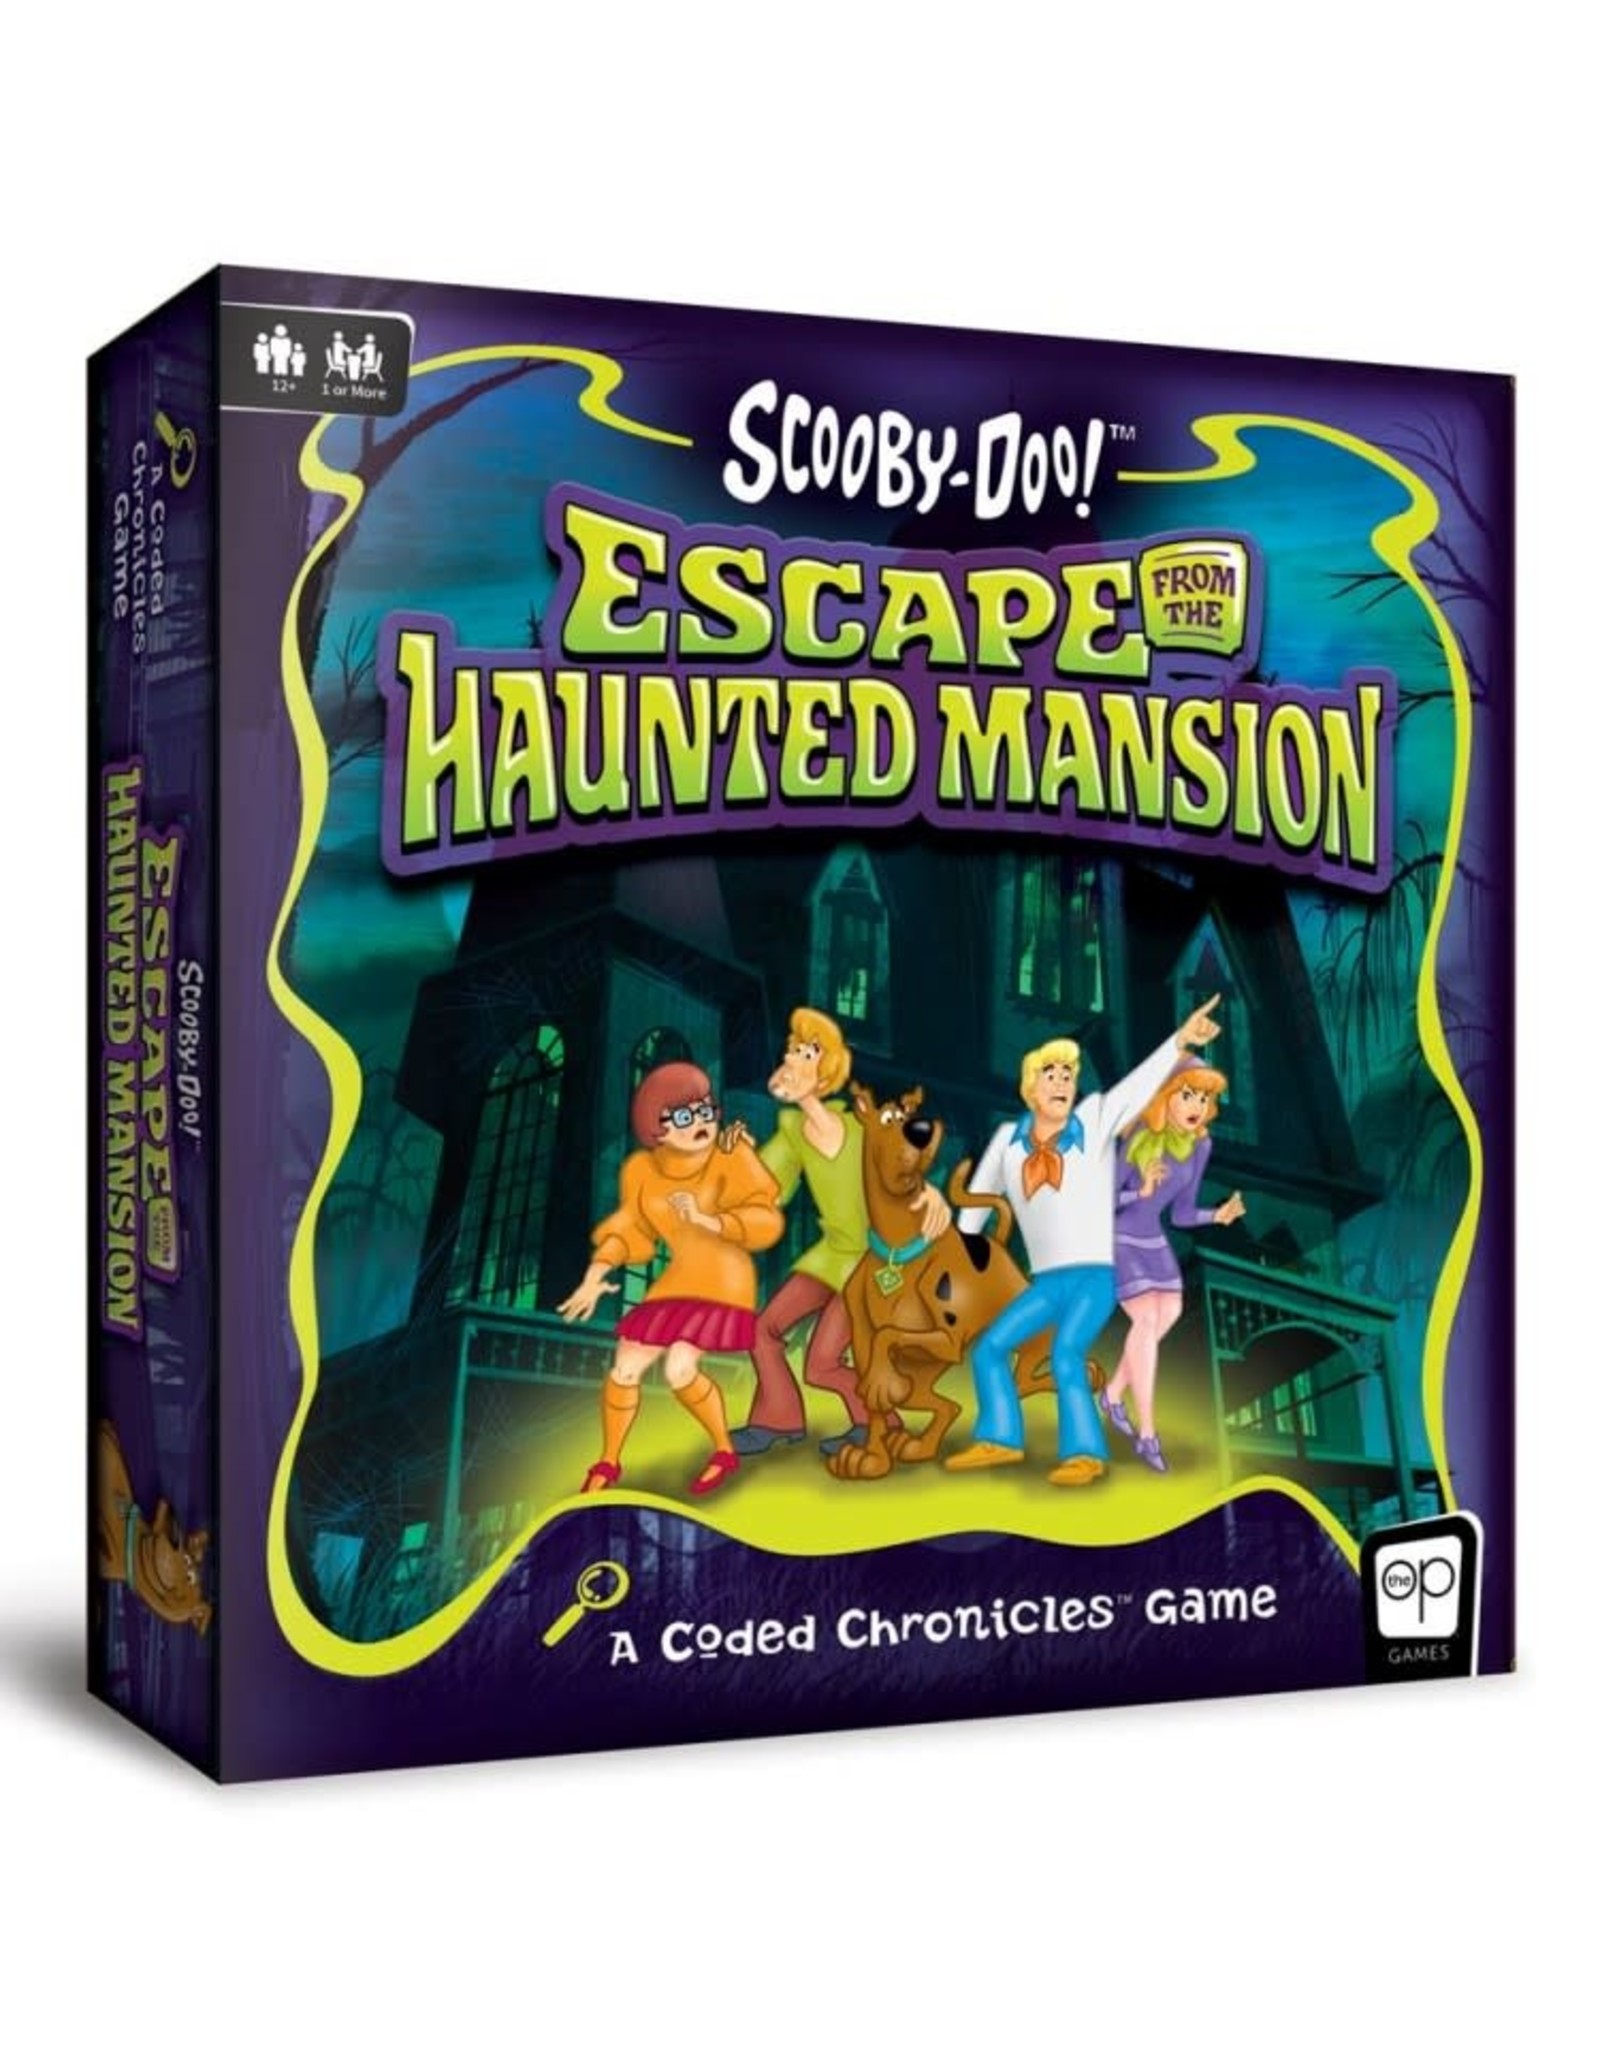 Scooby-Doo: Escape from Haunted Mansion - The Wandering Dragon Game ...